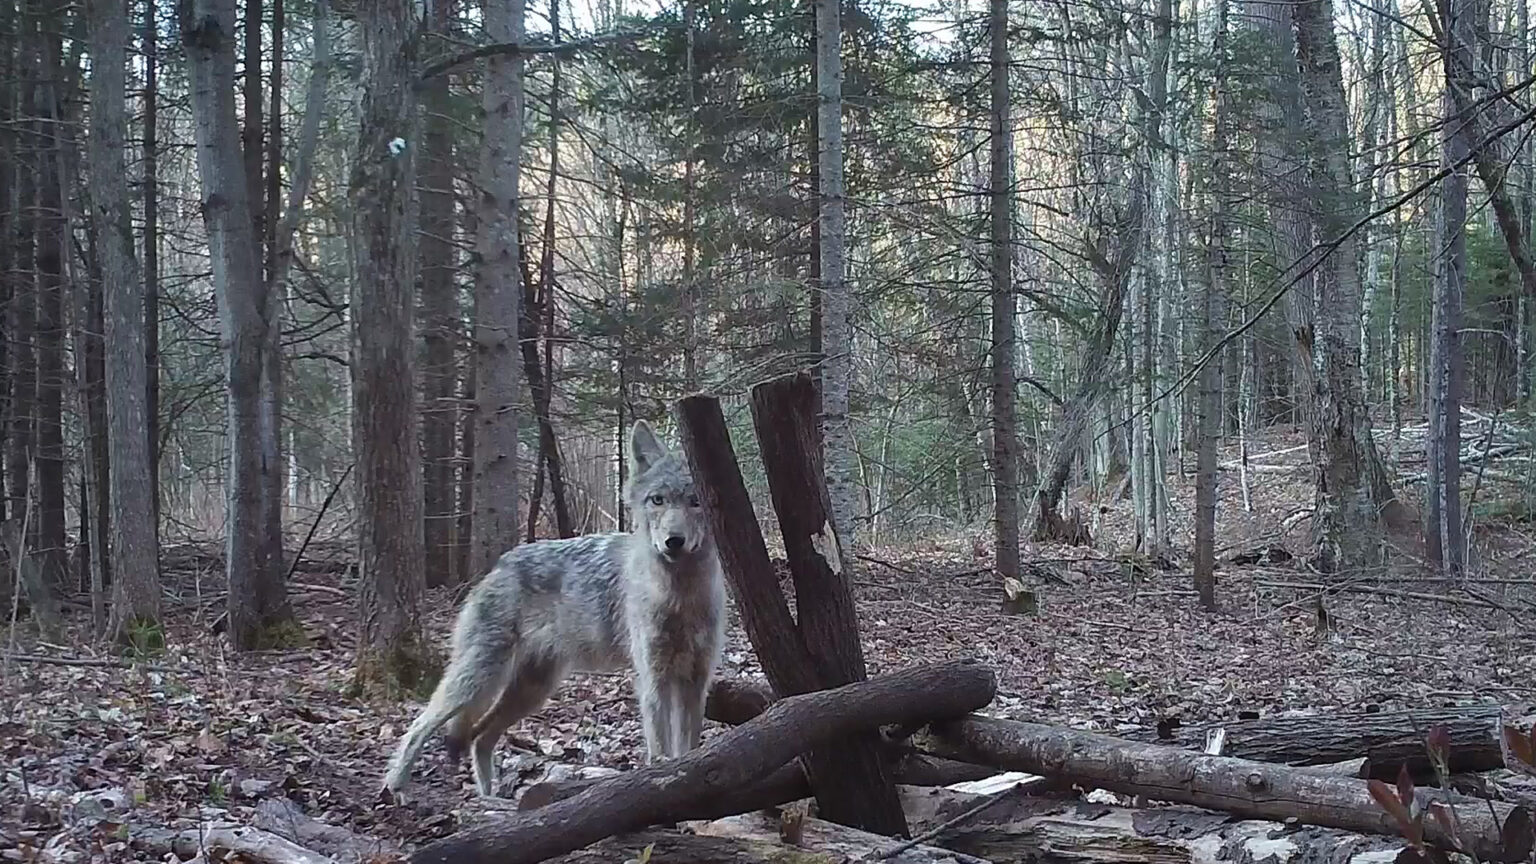 A wolf stands near logs piled in a leaf-covered forest clearing.